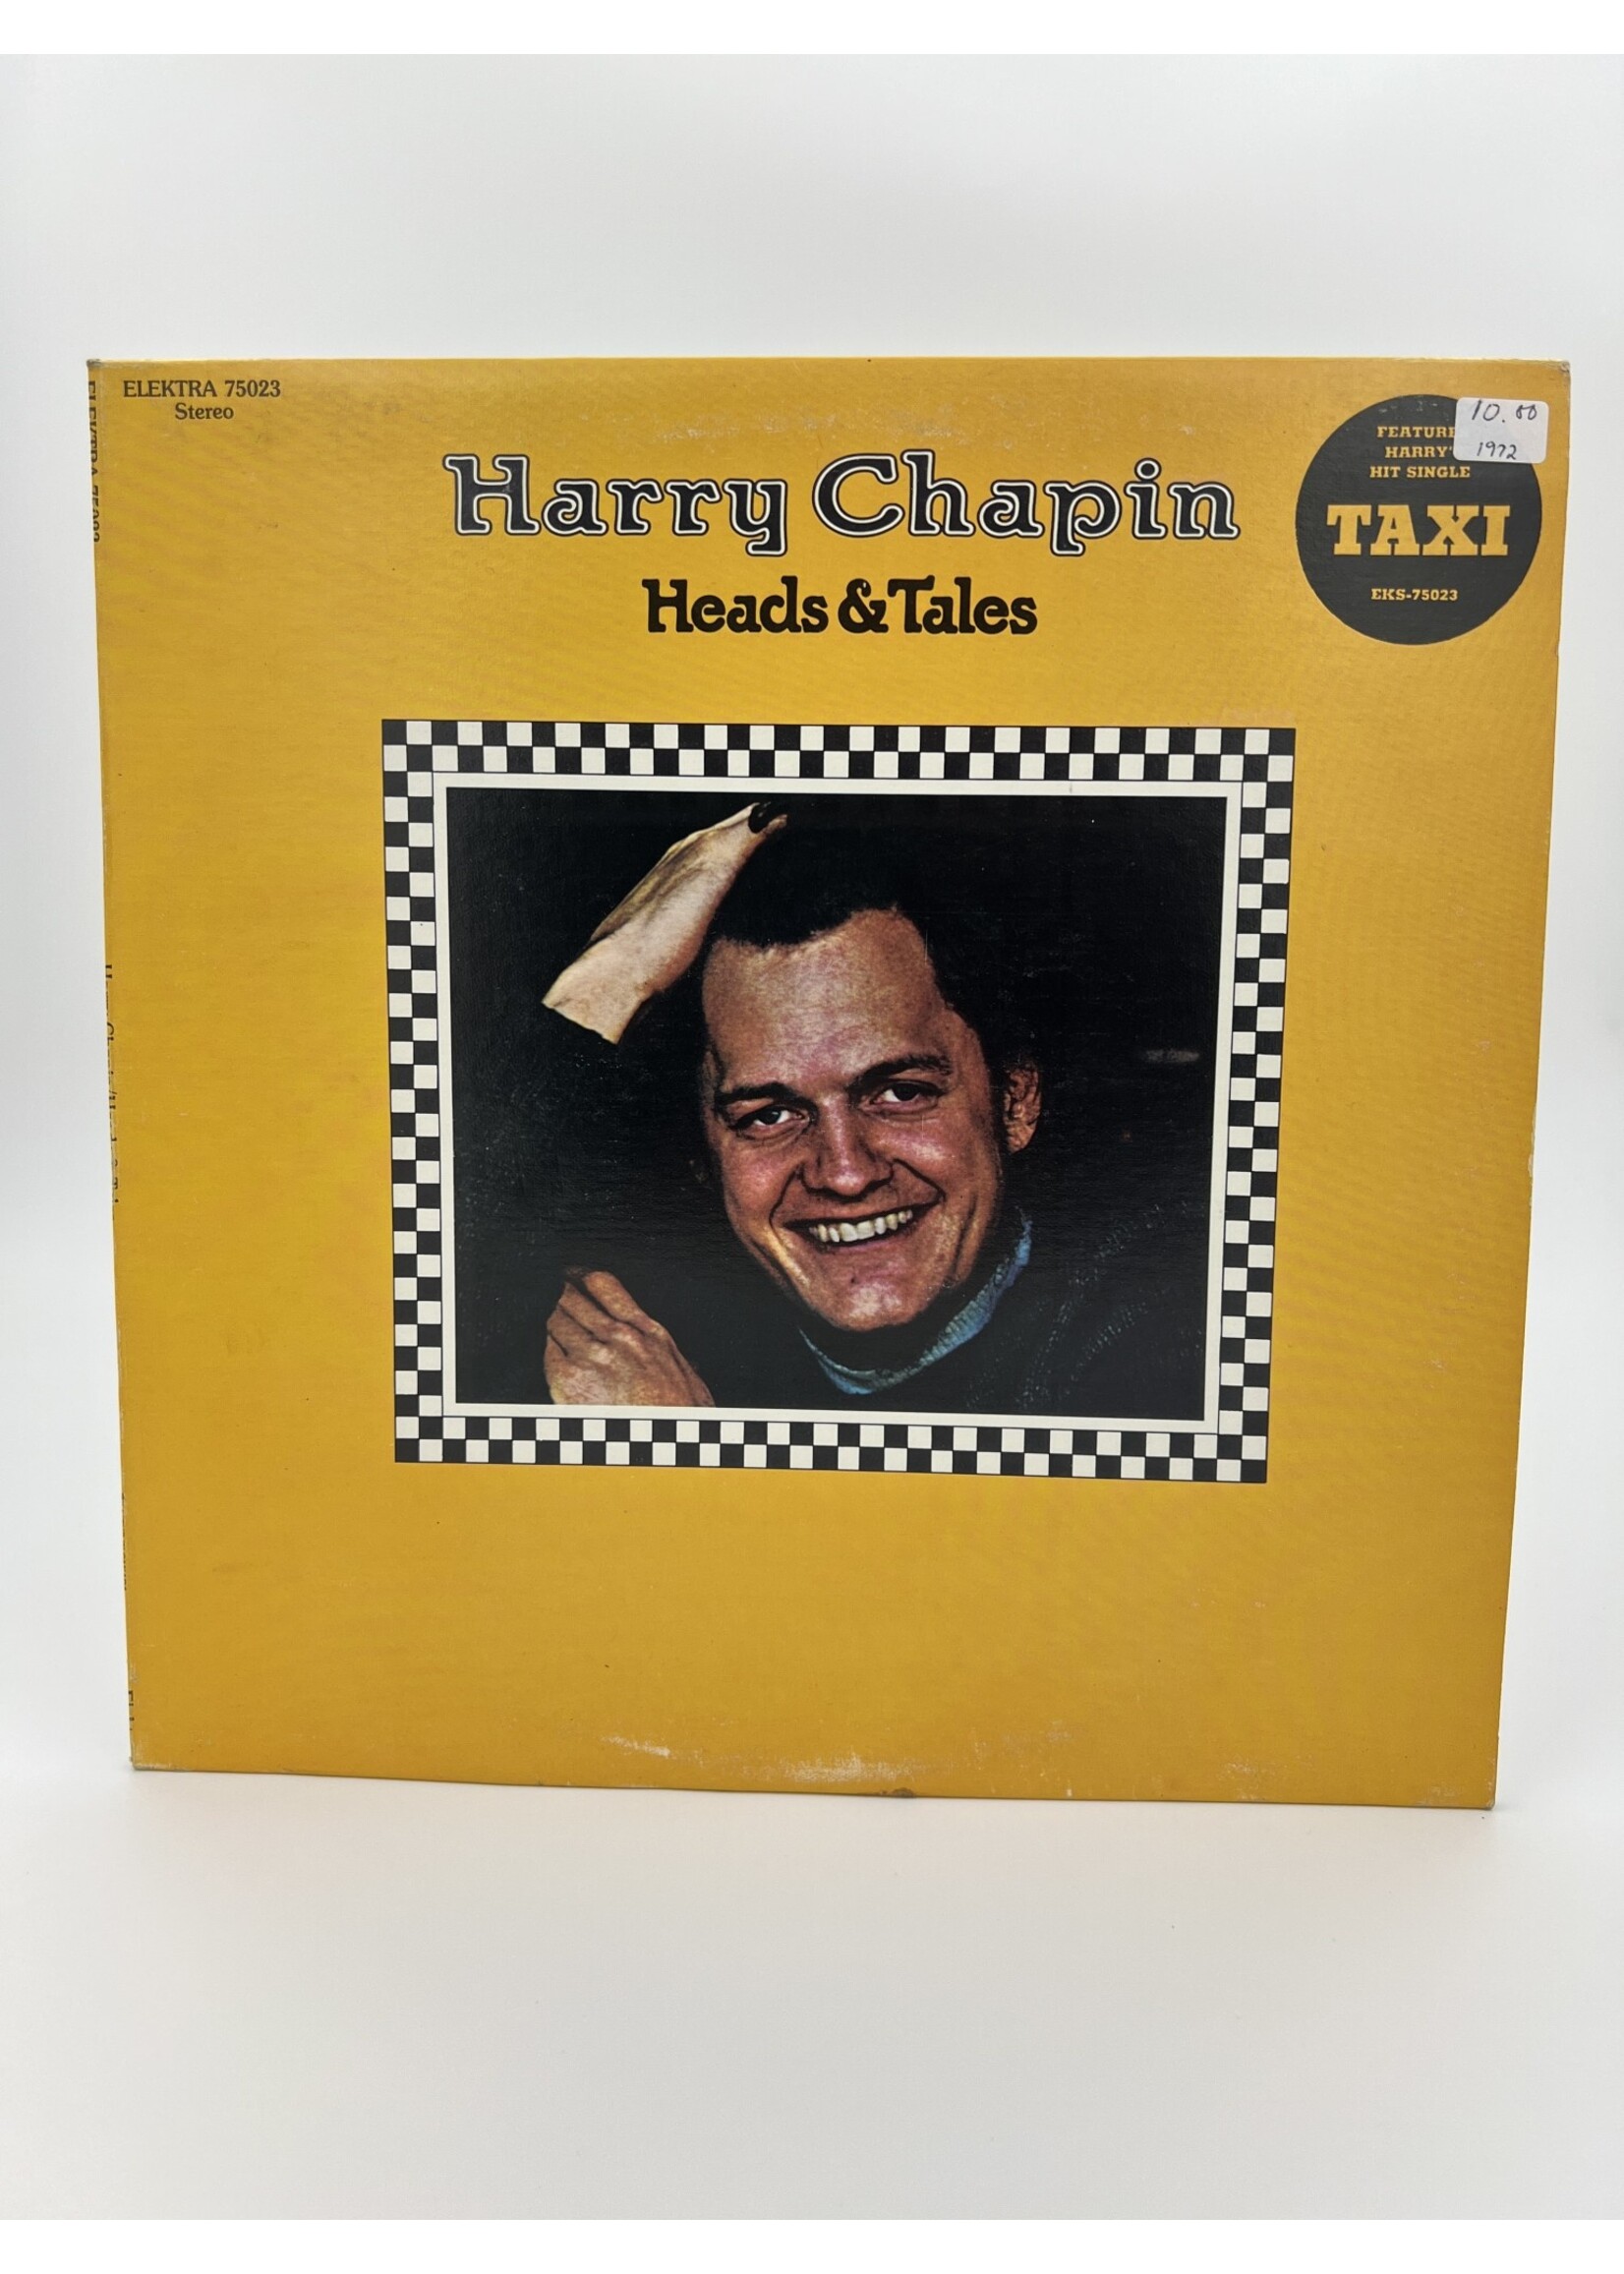 LP Harry Chapin Heads And Tales LP